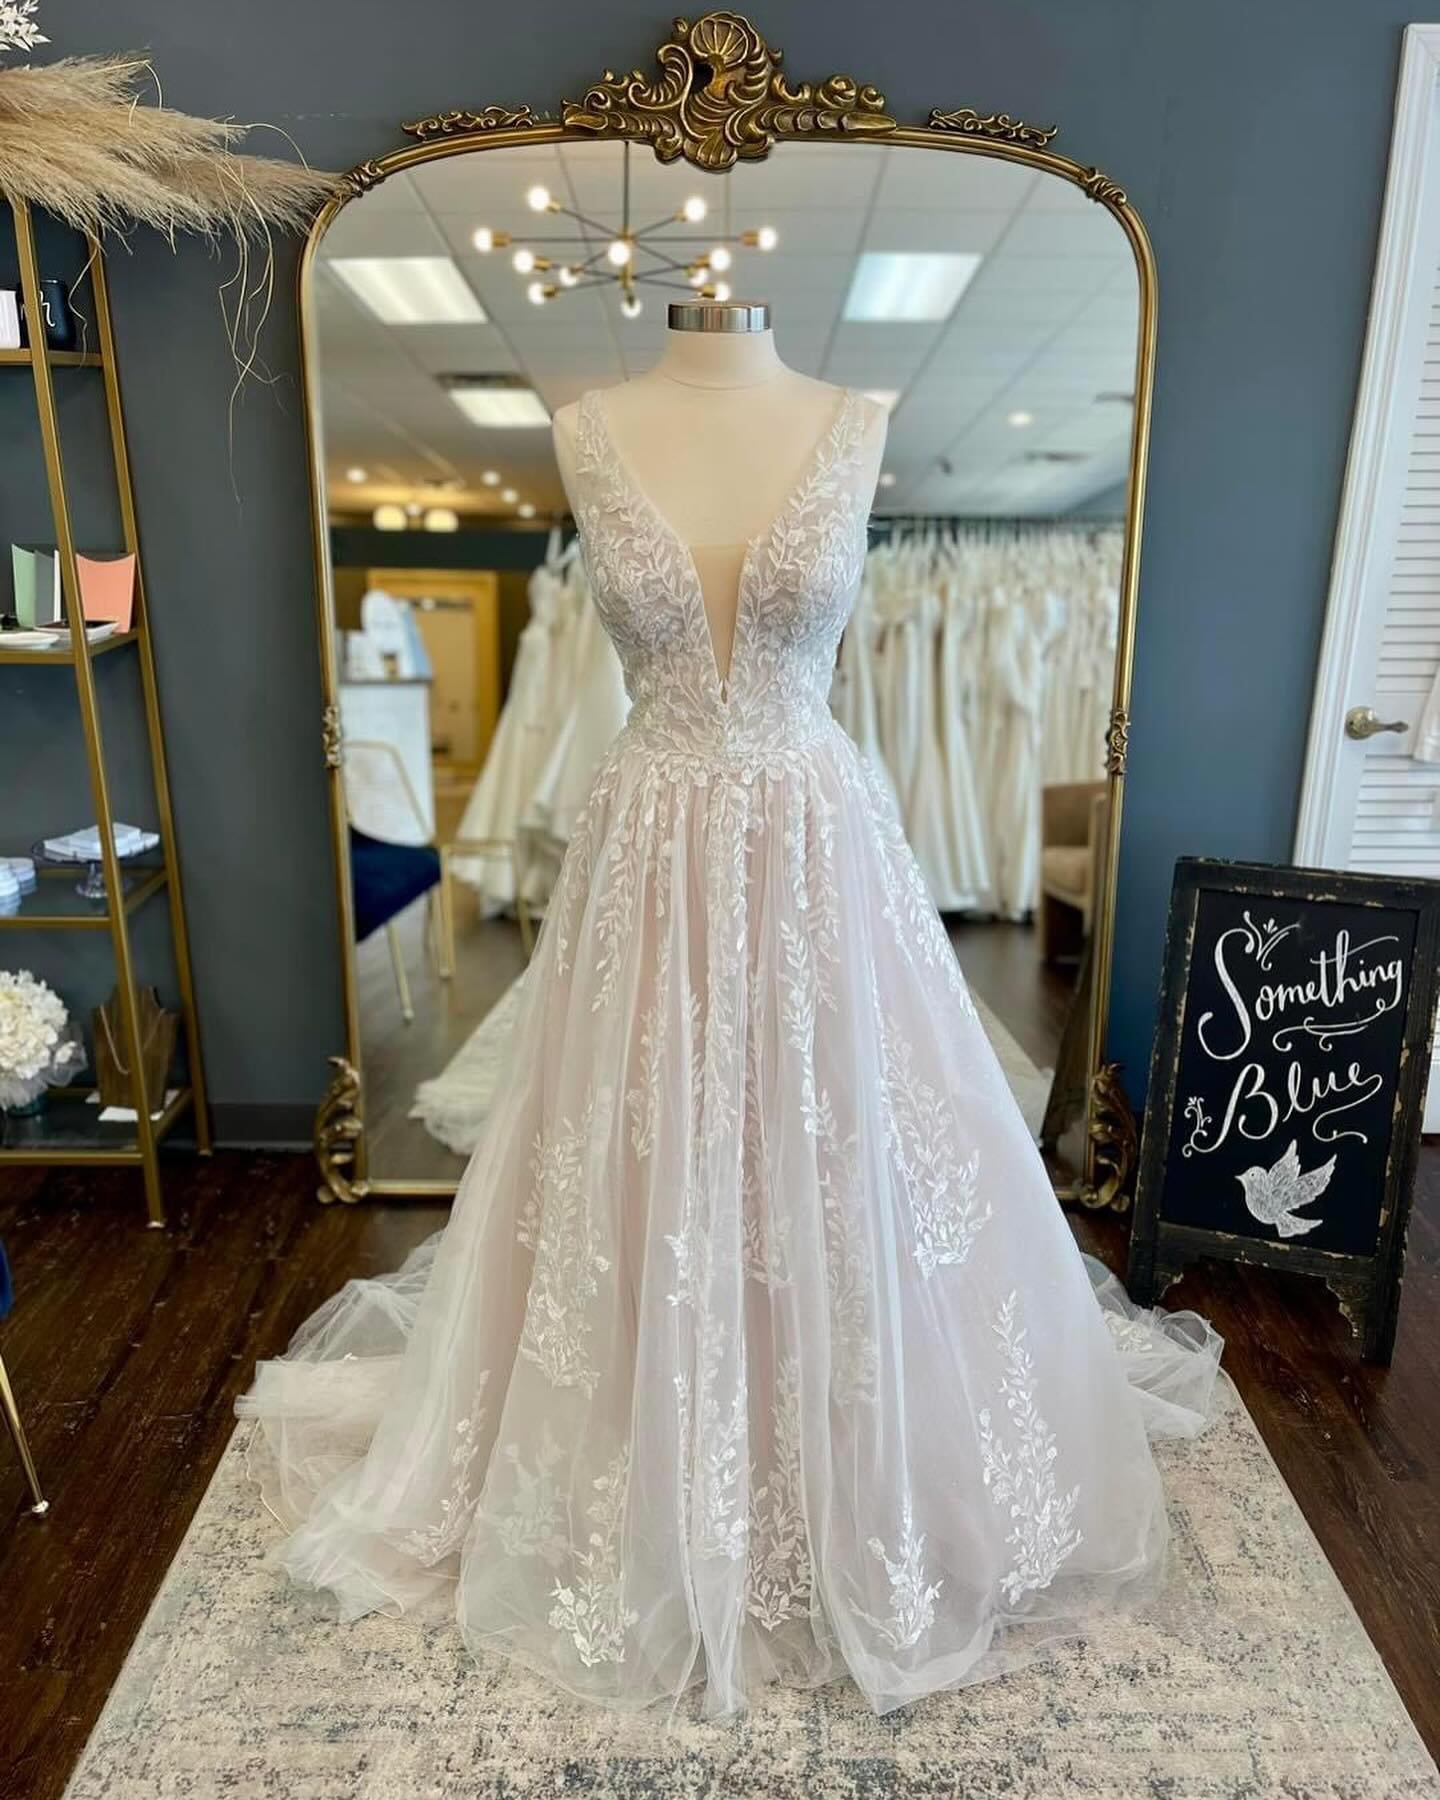 Sparkling leafy lace? ✔️ Plunging neckline? ✔️ Beautiful train? ✔️ 

Our pick for this week&rsquo;s #WeddingGownWednesday has it all! This stunning new A-line gown also features lace adorned straps and buttons along the zipper! You can try this gorge